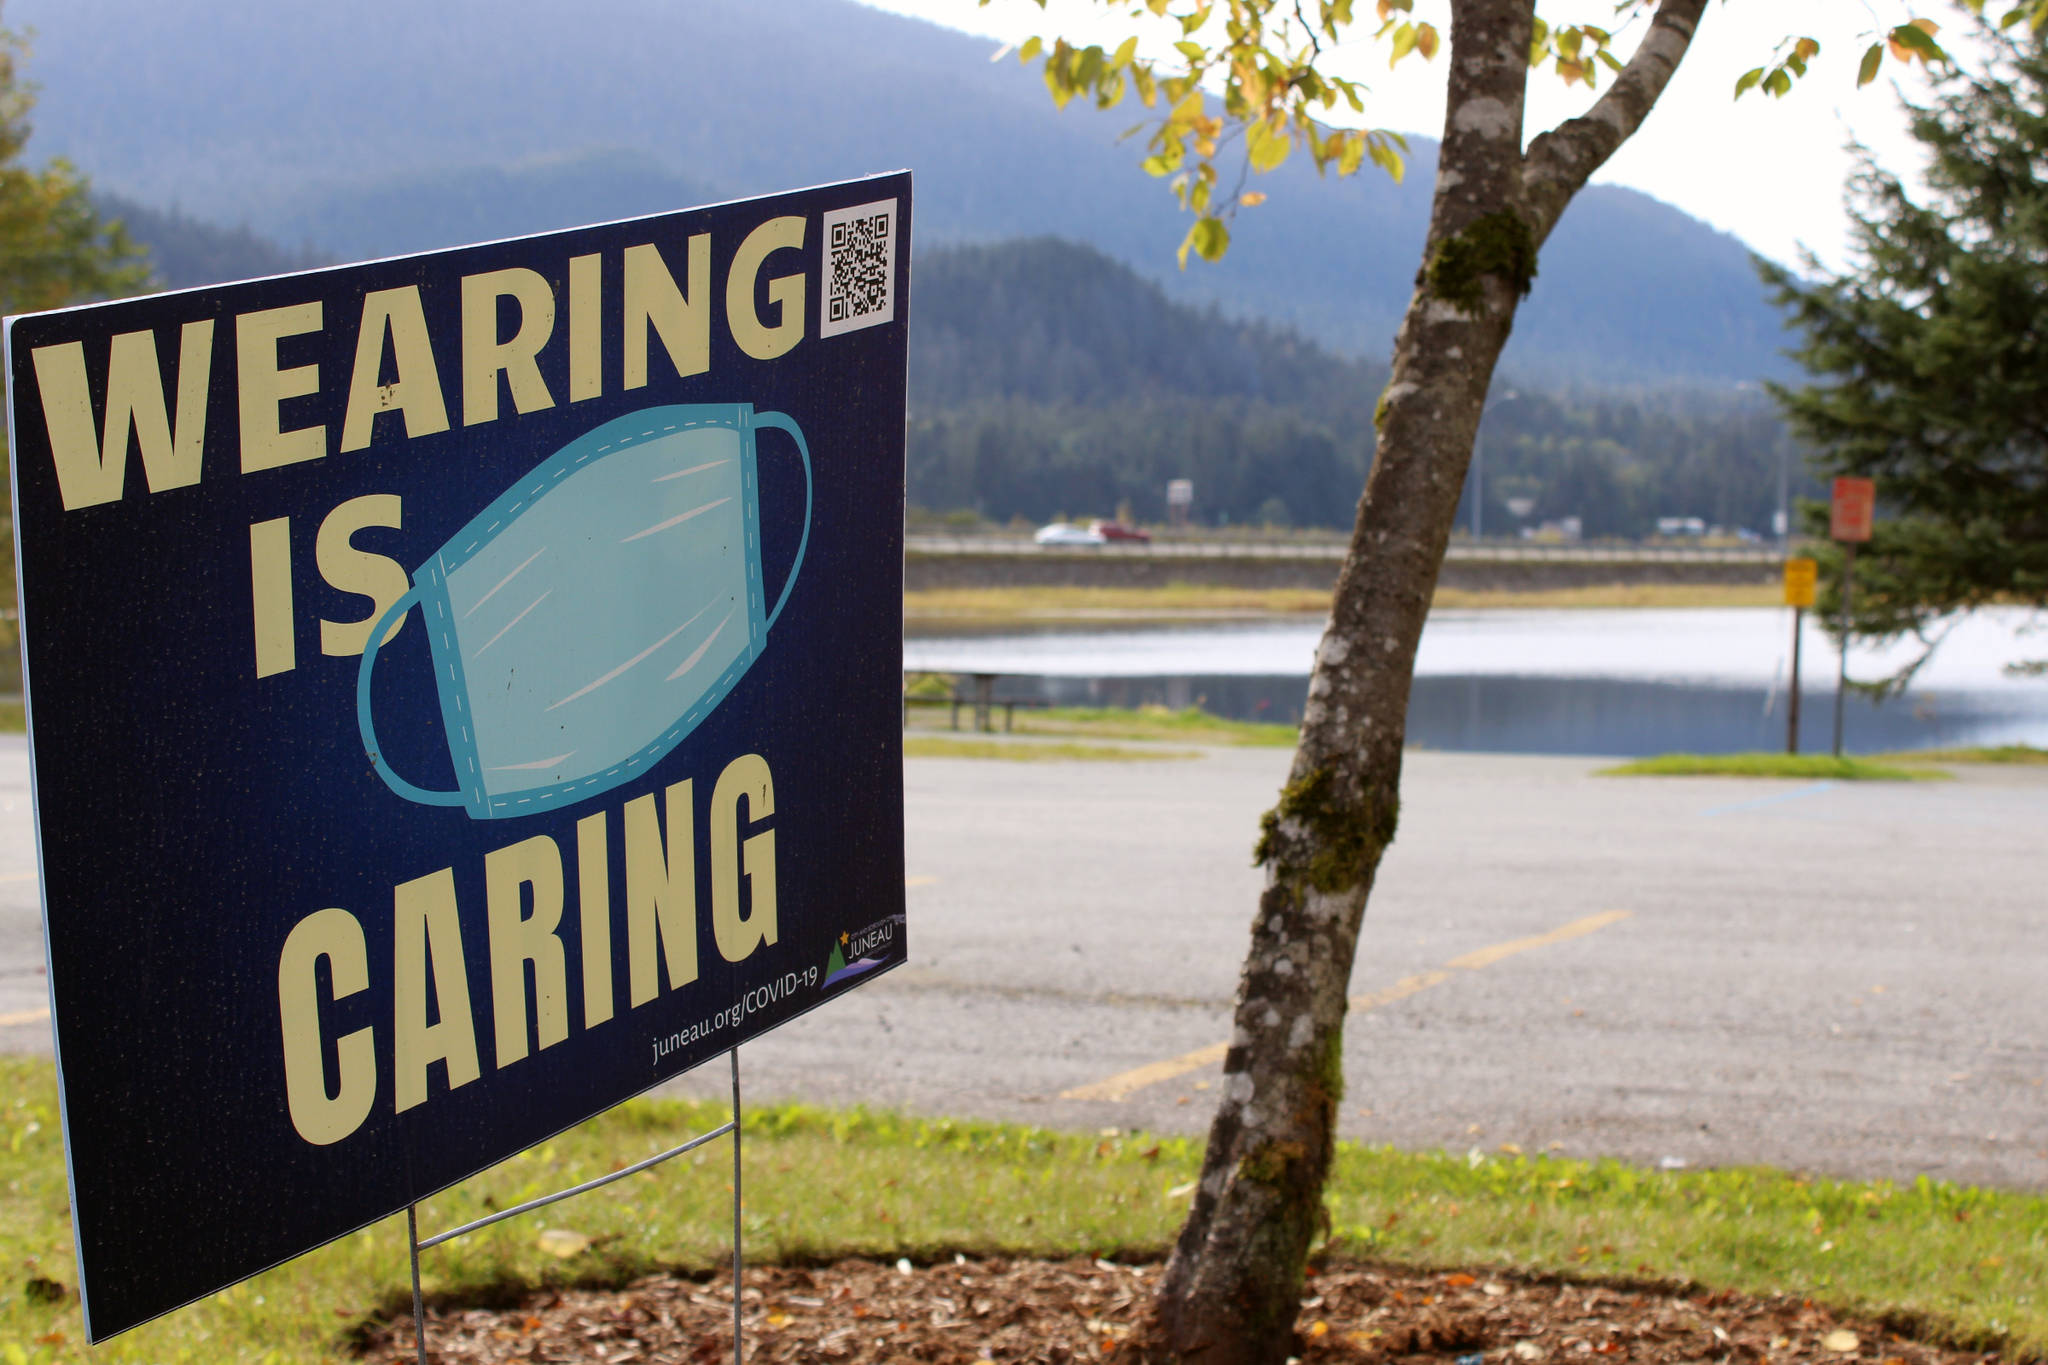 A sign seen near Twin Lakes on Wednesday encourages residents to wear cloth face coverings while in public. A social gathering tied to a recent cluster of cases of COVID-19 is unlikely to lead to punishment, but city officials are hopeful it may encourage people to be more cautious. Ben Hohenstatt / Juneau Empire